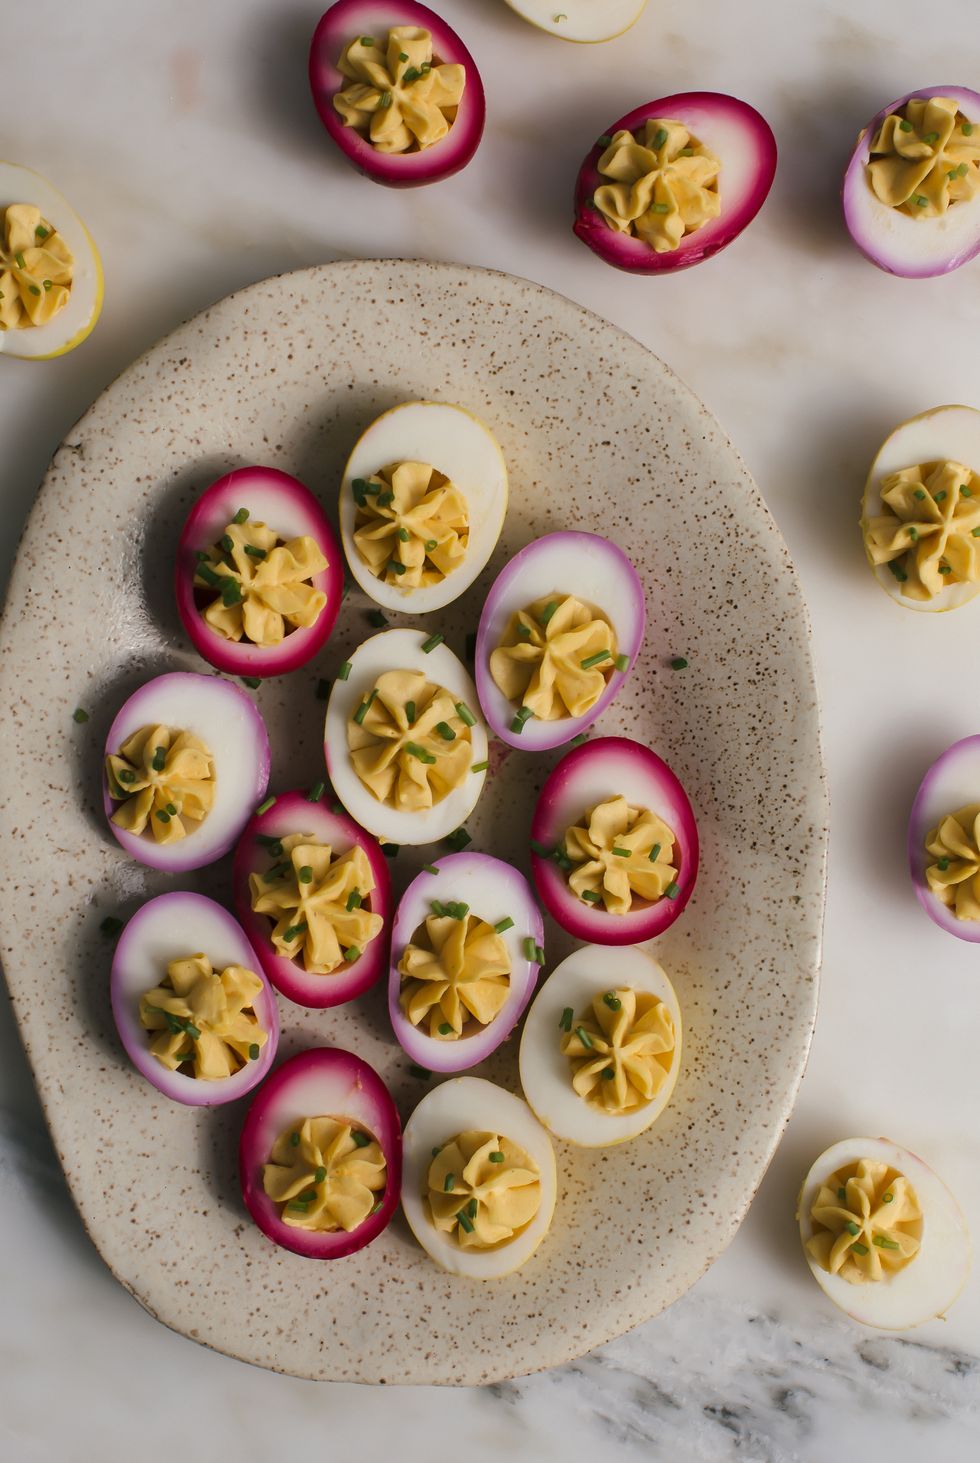 Quick Deviled Eggs Recipes with a Twist